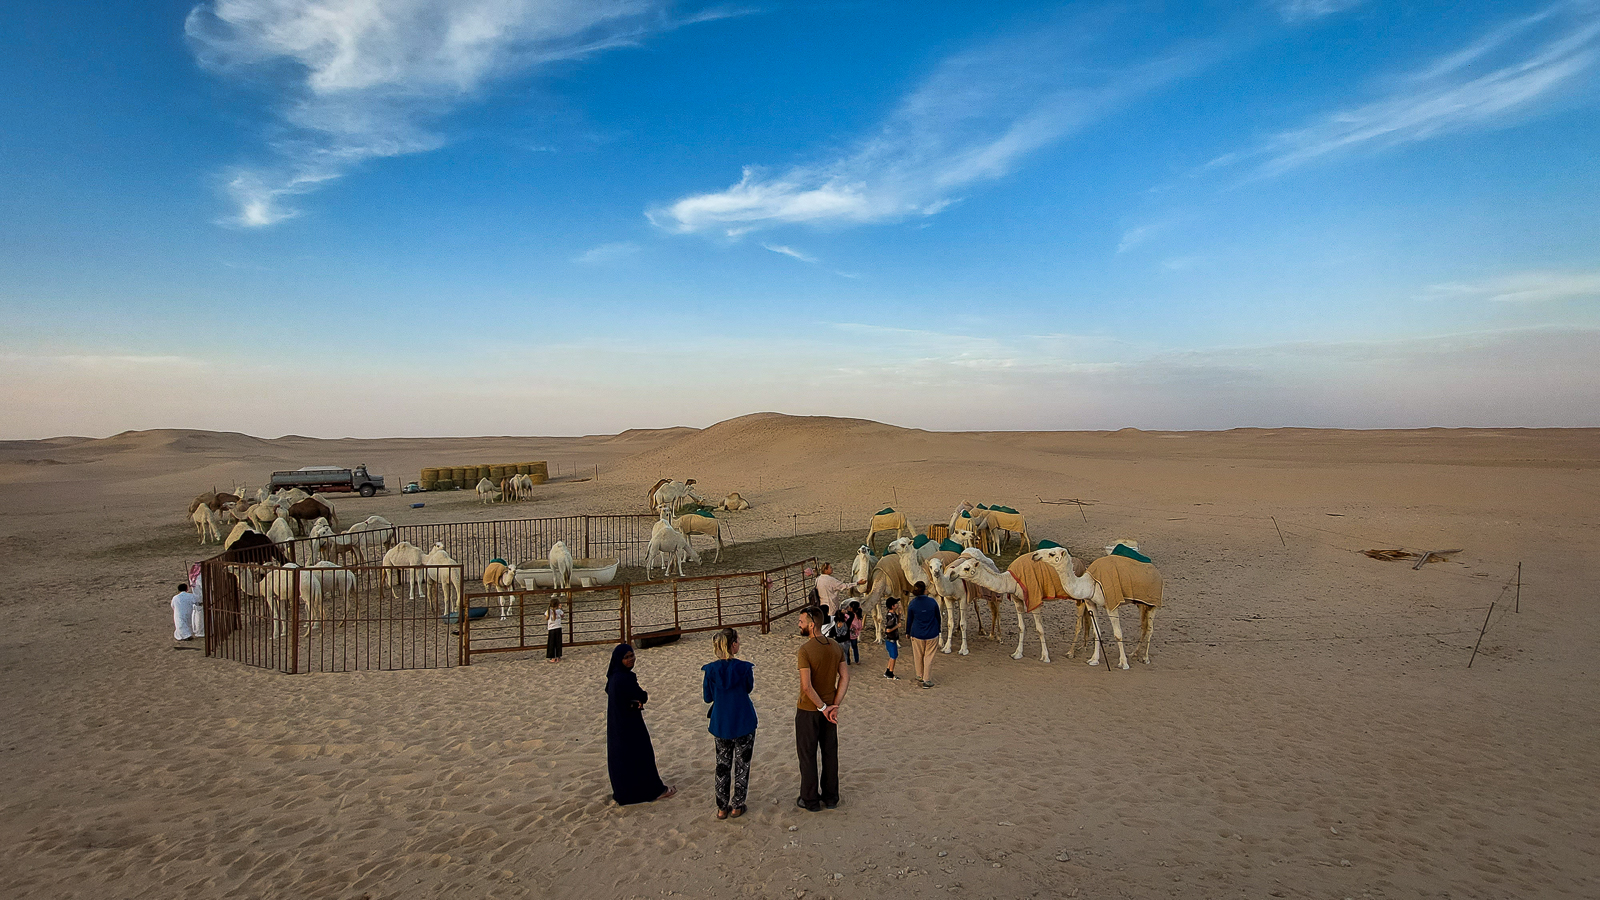 <span  class="uc_style_uc_tiles_grid_image_elementor_uc_items_attribute_title" style="color:#ffffff;">That Saudi family has her weekend camp here - a little herd of camels is part of that</span>